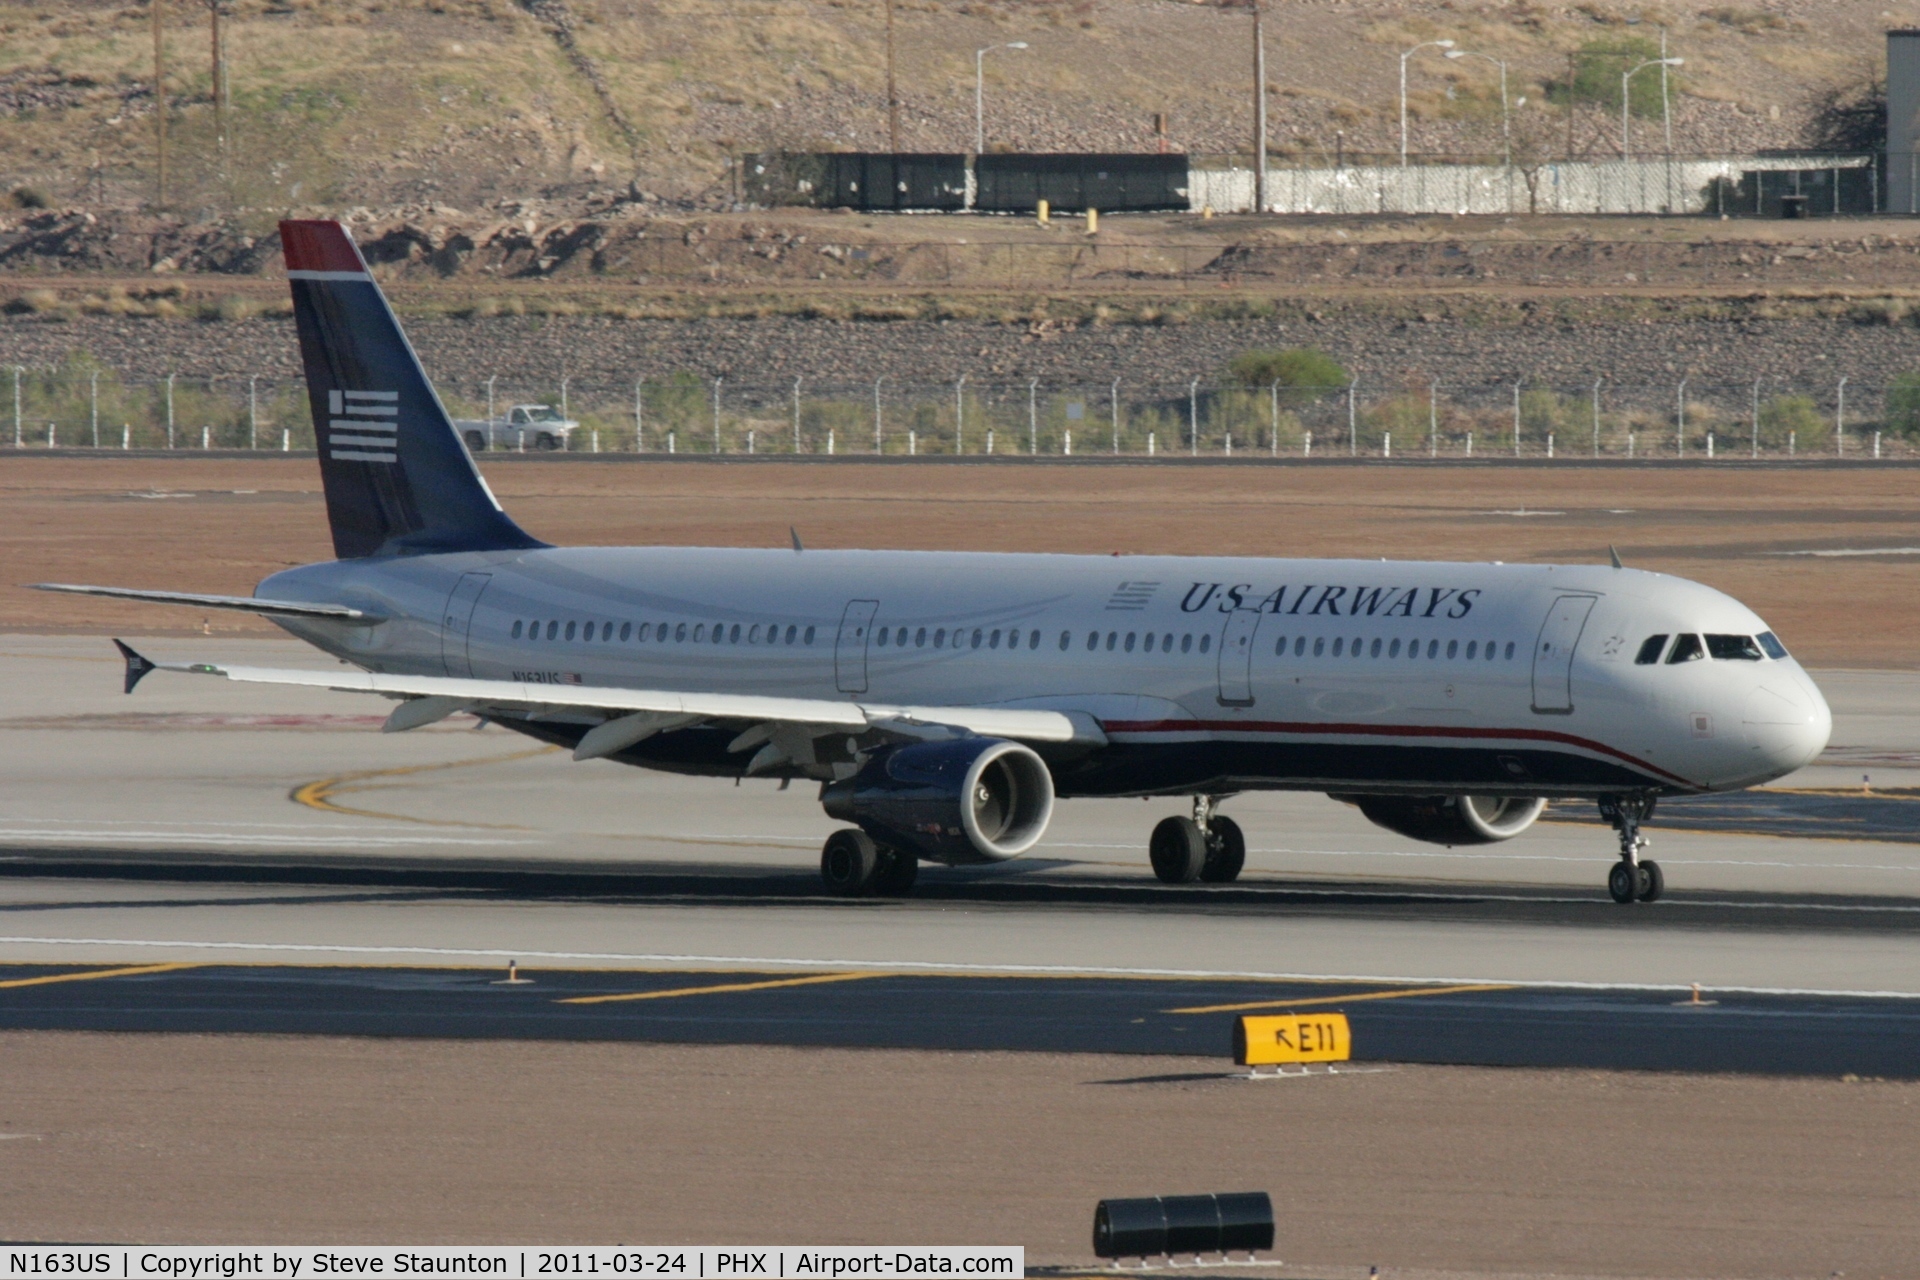 N163US, 2001 Airbus A321-211 C/N 1417, Taken at Phoenix Sky Harbor Airport, in March 2011 whilst on an Aeroprint Aviation tour